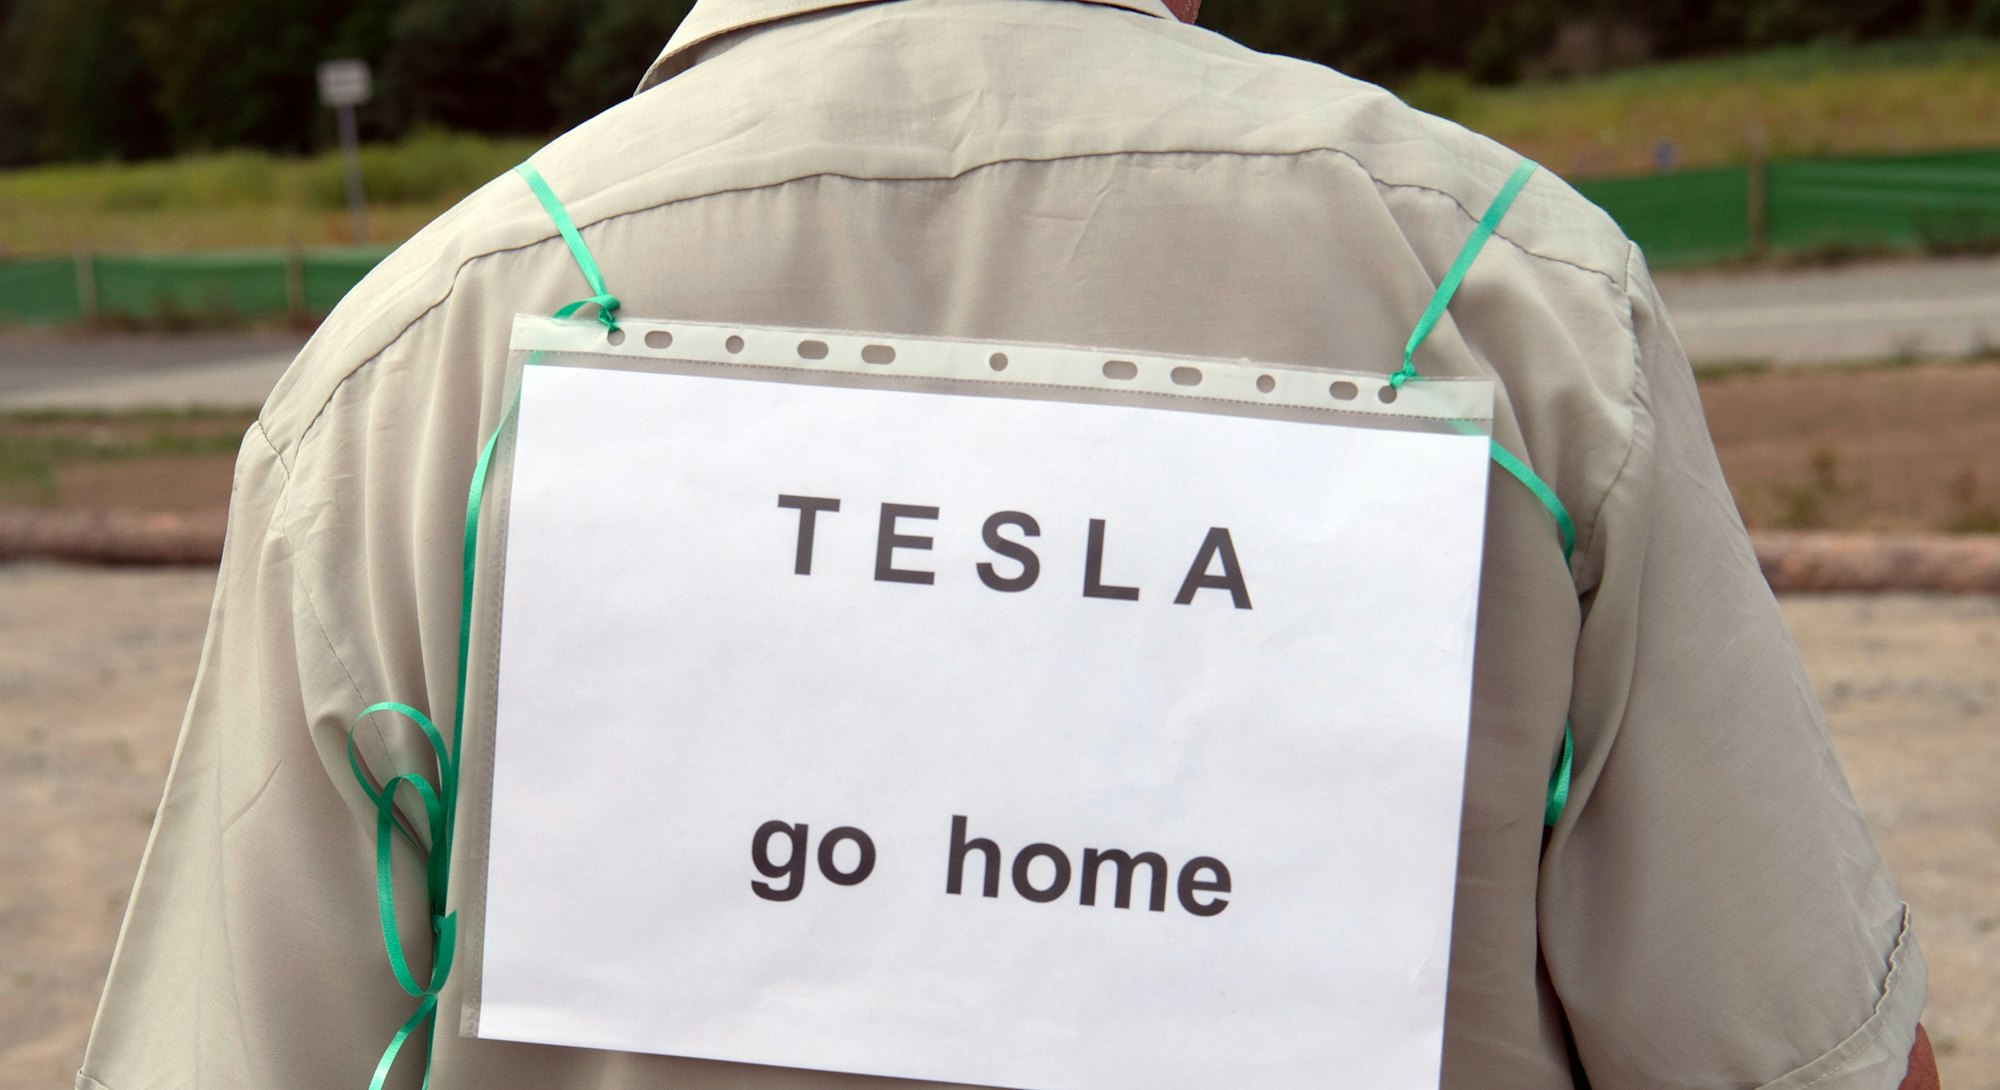 A crowd demonstrates against the settlement of Tesla in Grunheide, Germany.